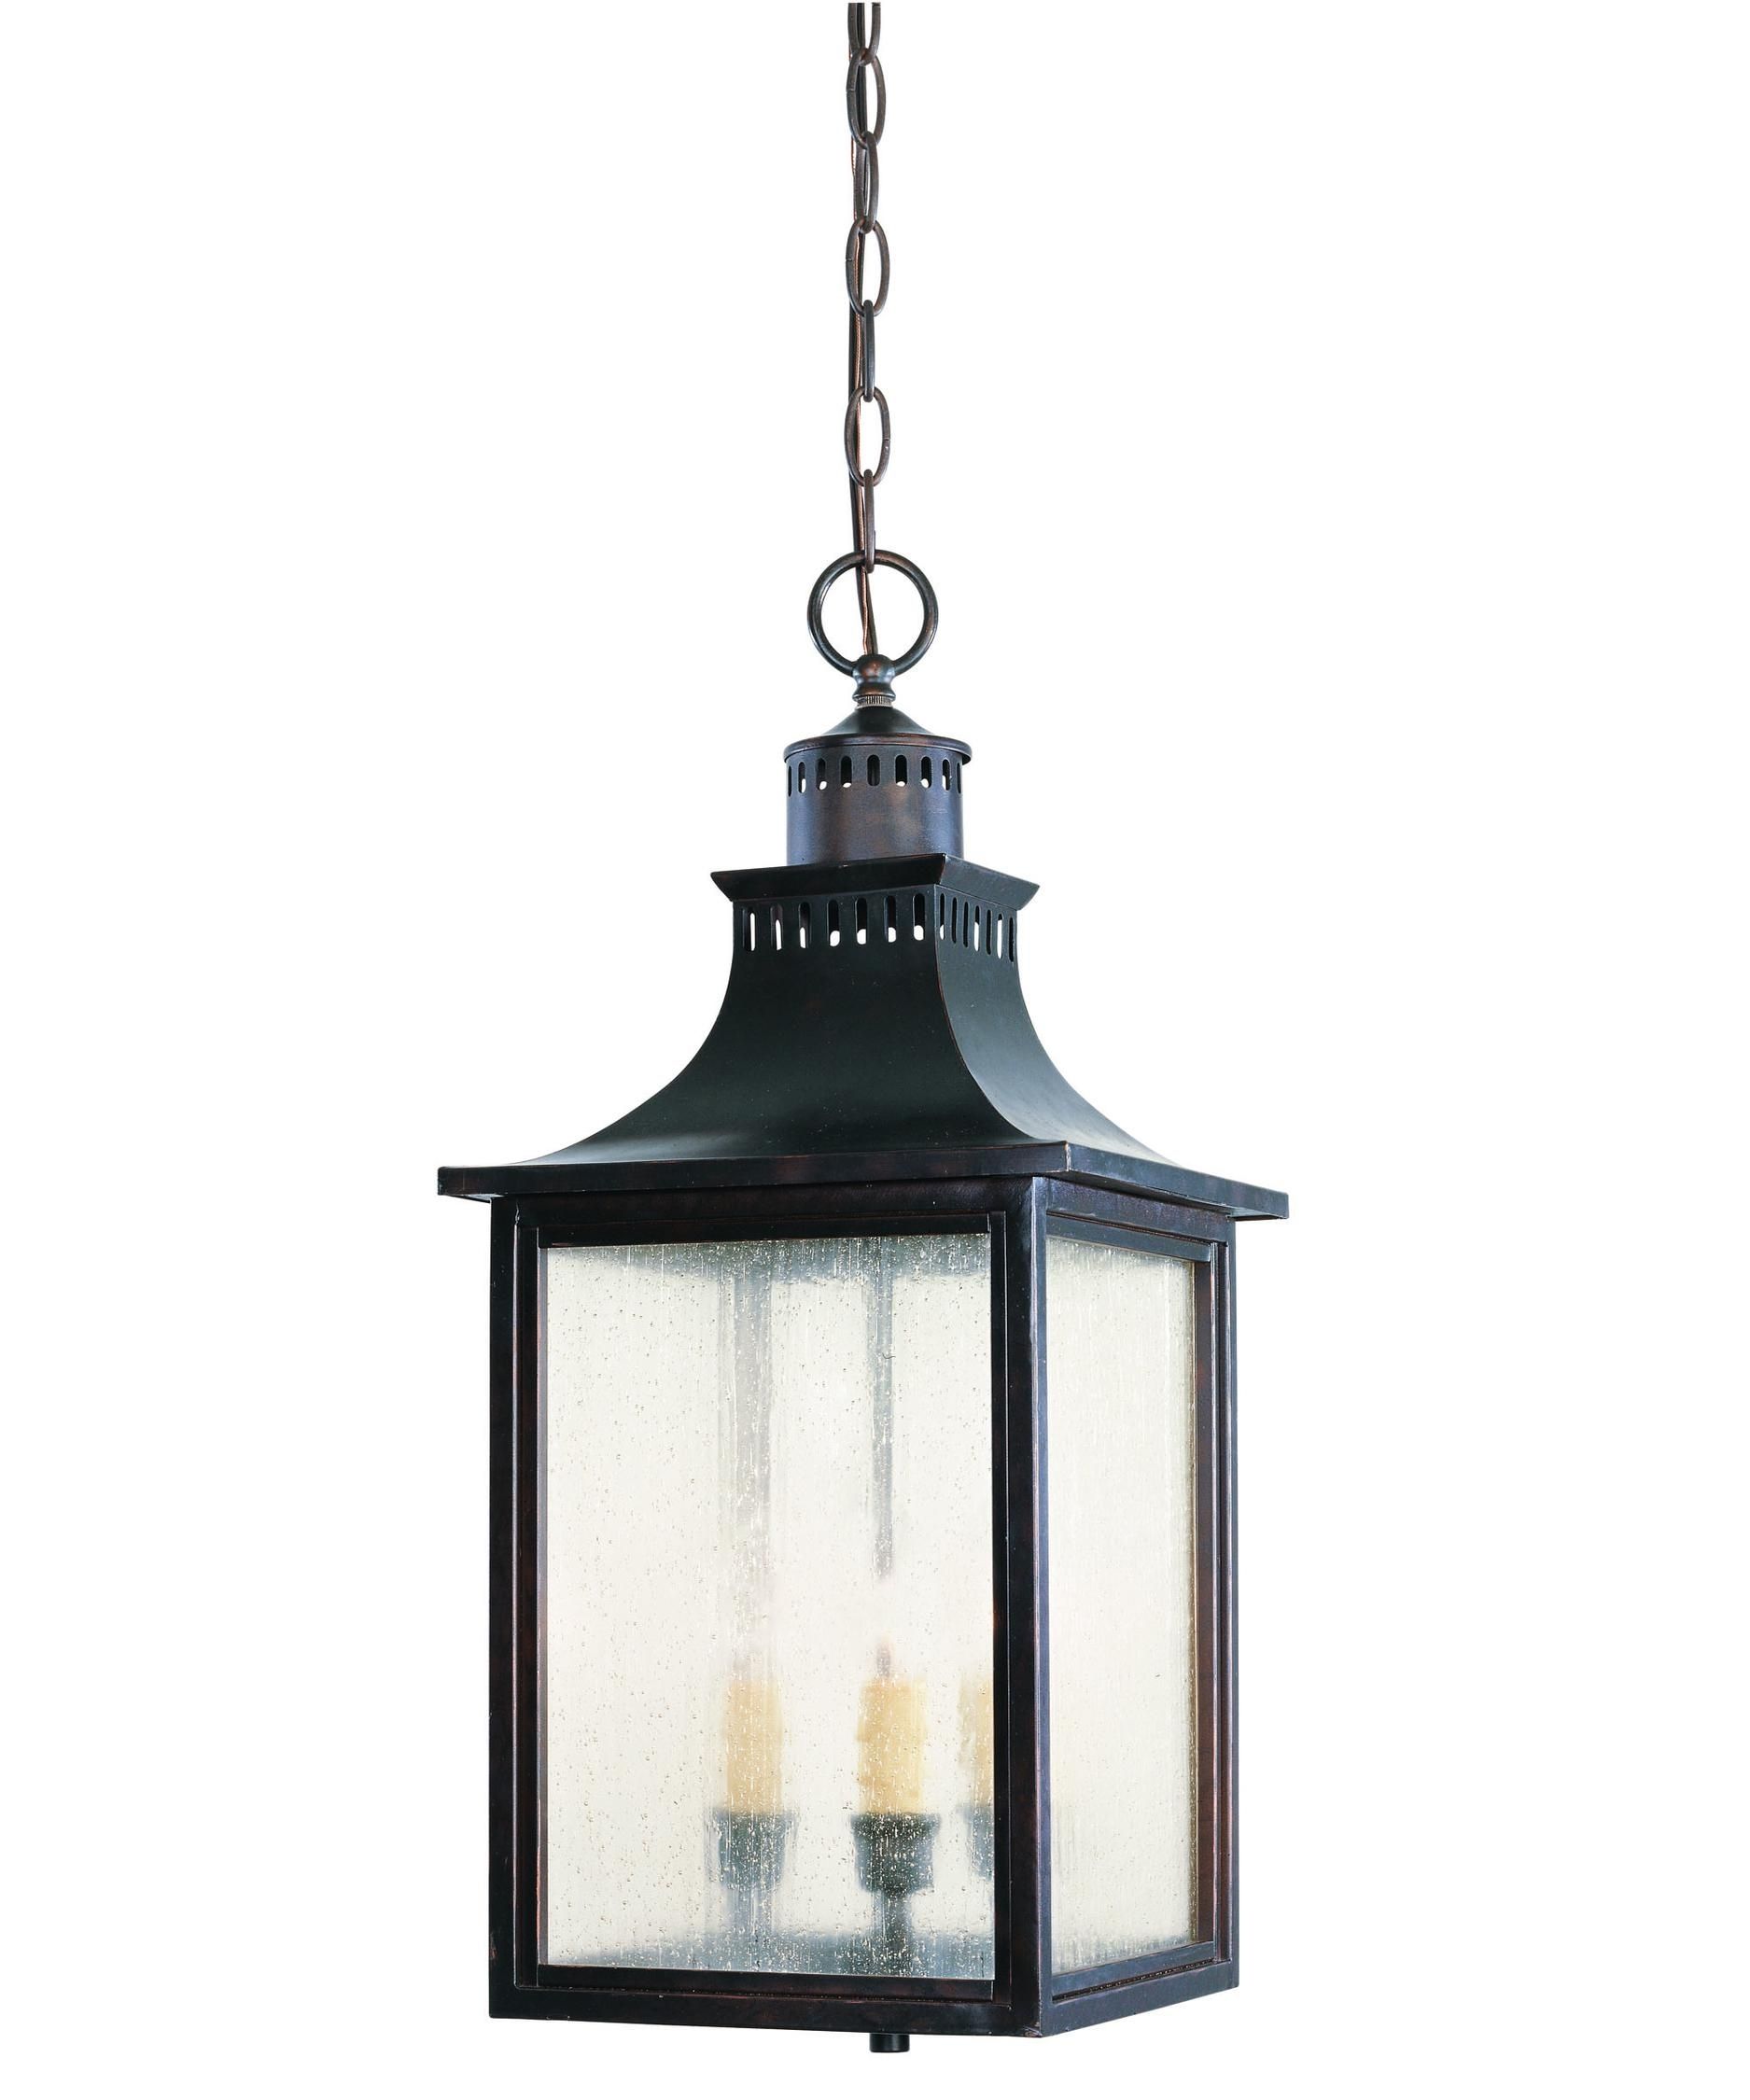 Savoy House 5 256 Monte Grande 10 Inch Wide 3 Light Outdoor Hanging Intended For Led Outdoor Hanging Lanterns (View 15 of 15)